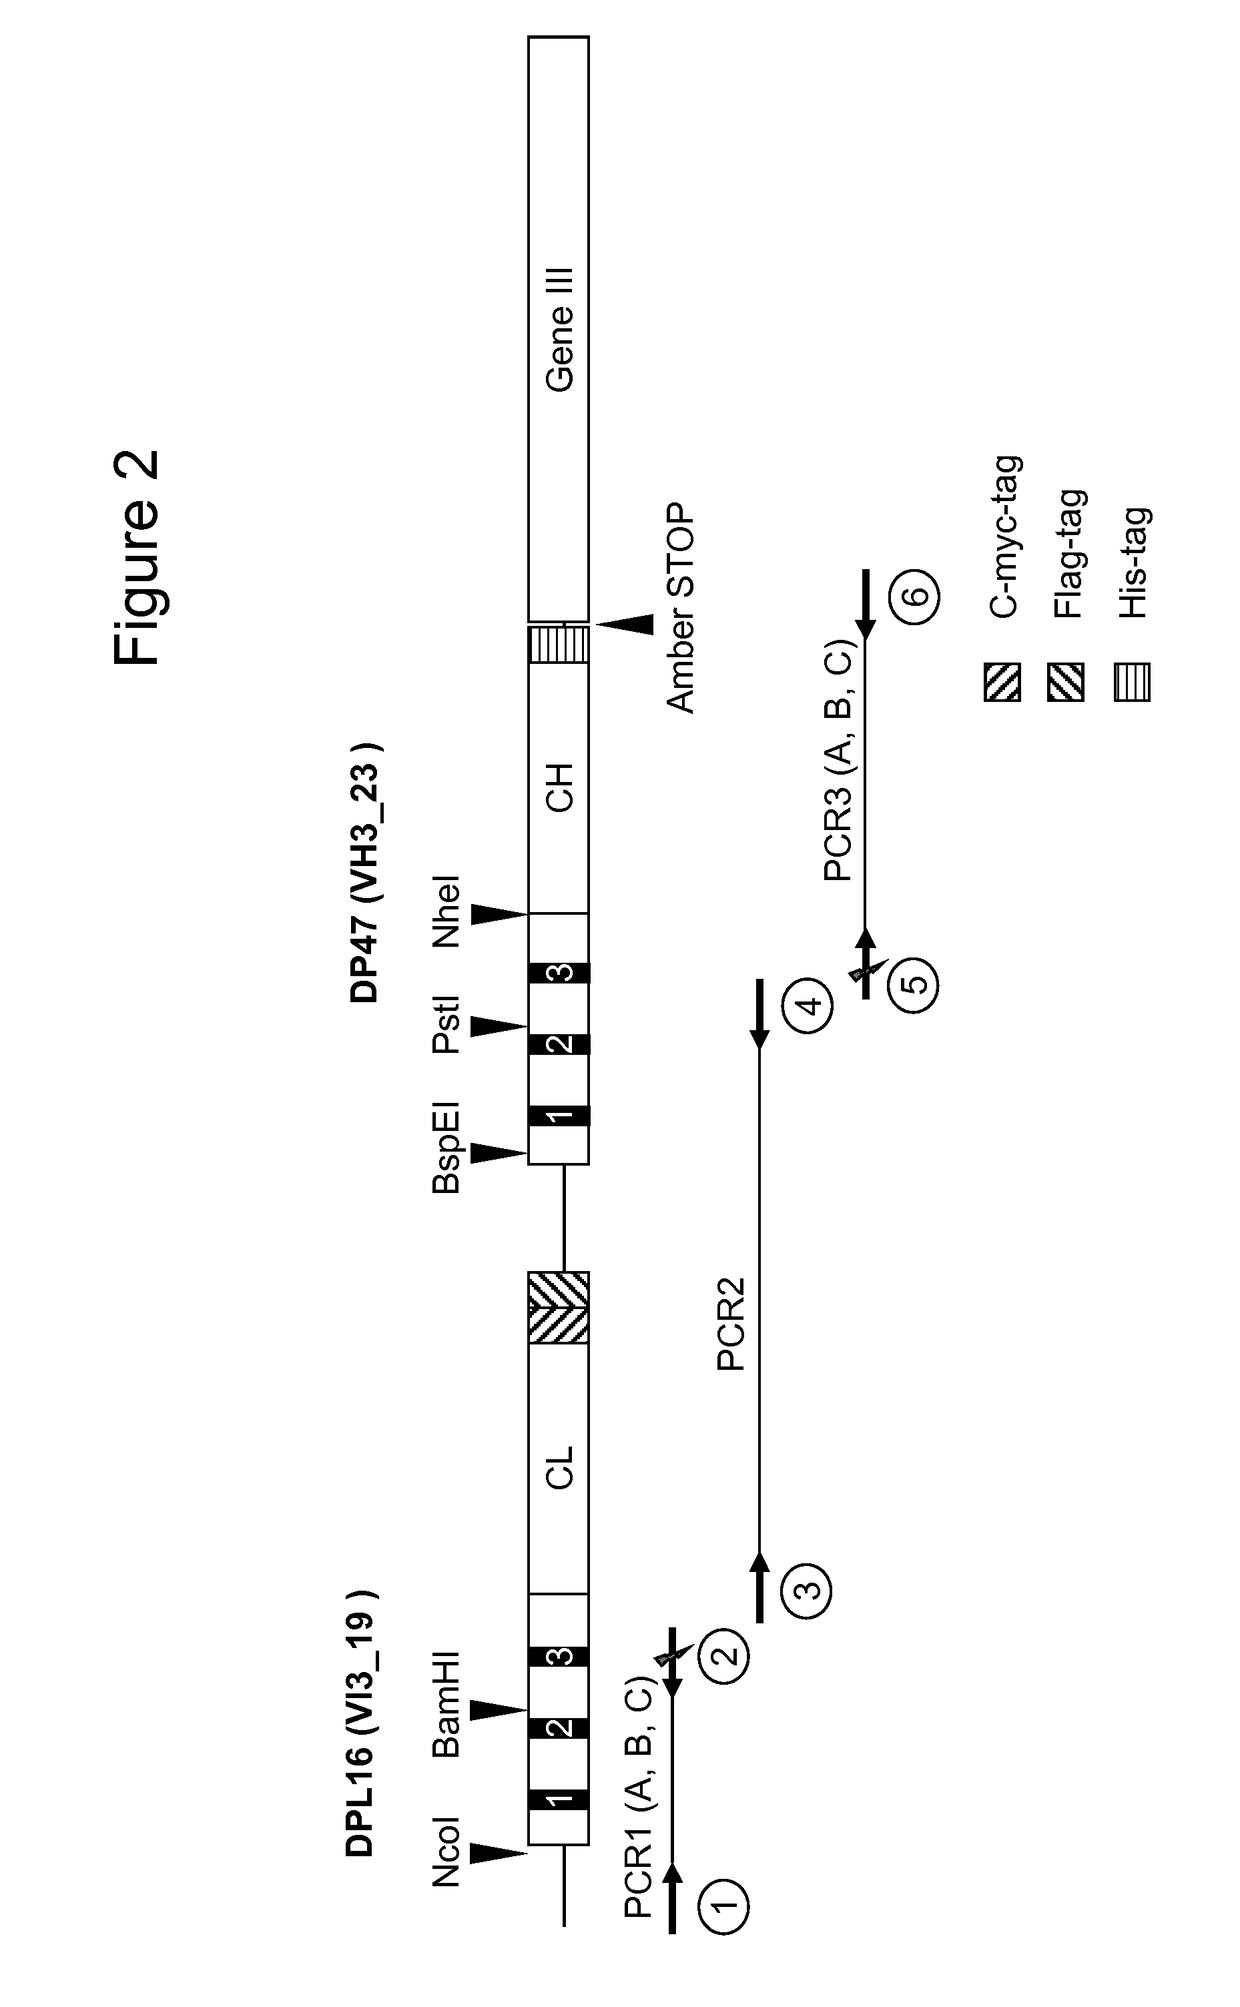 ASGPR antibodies and uses thereof